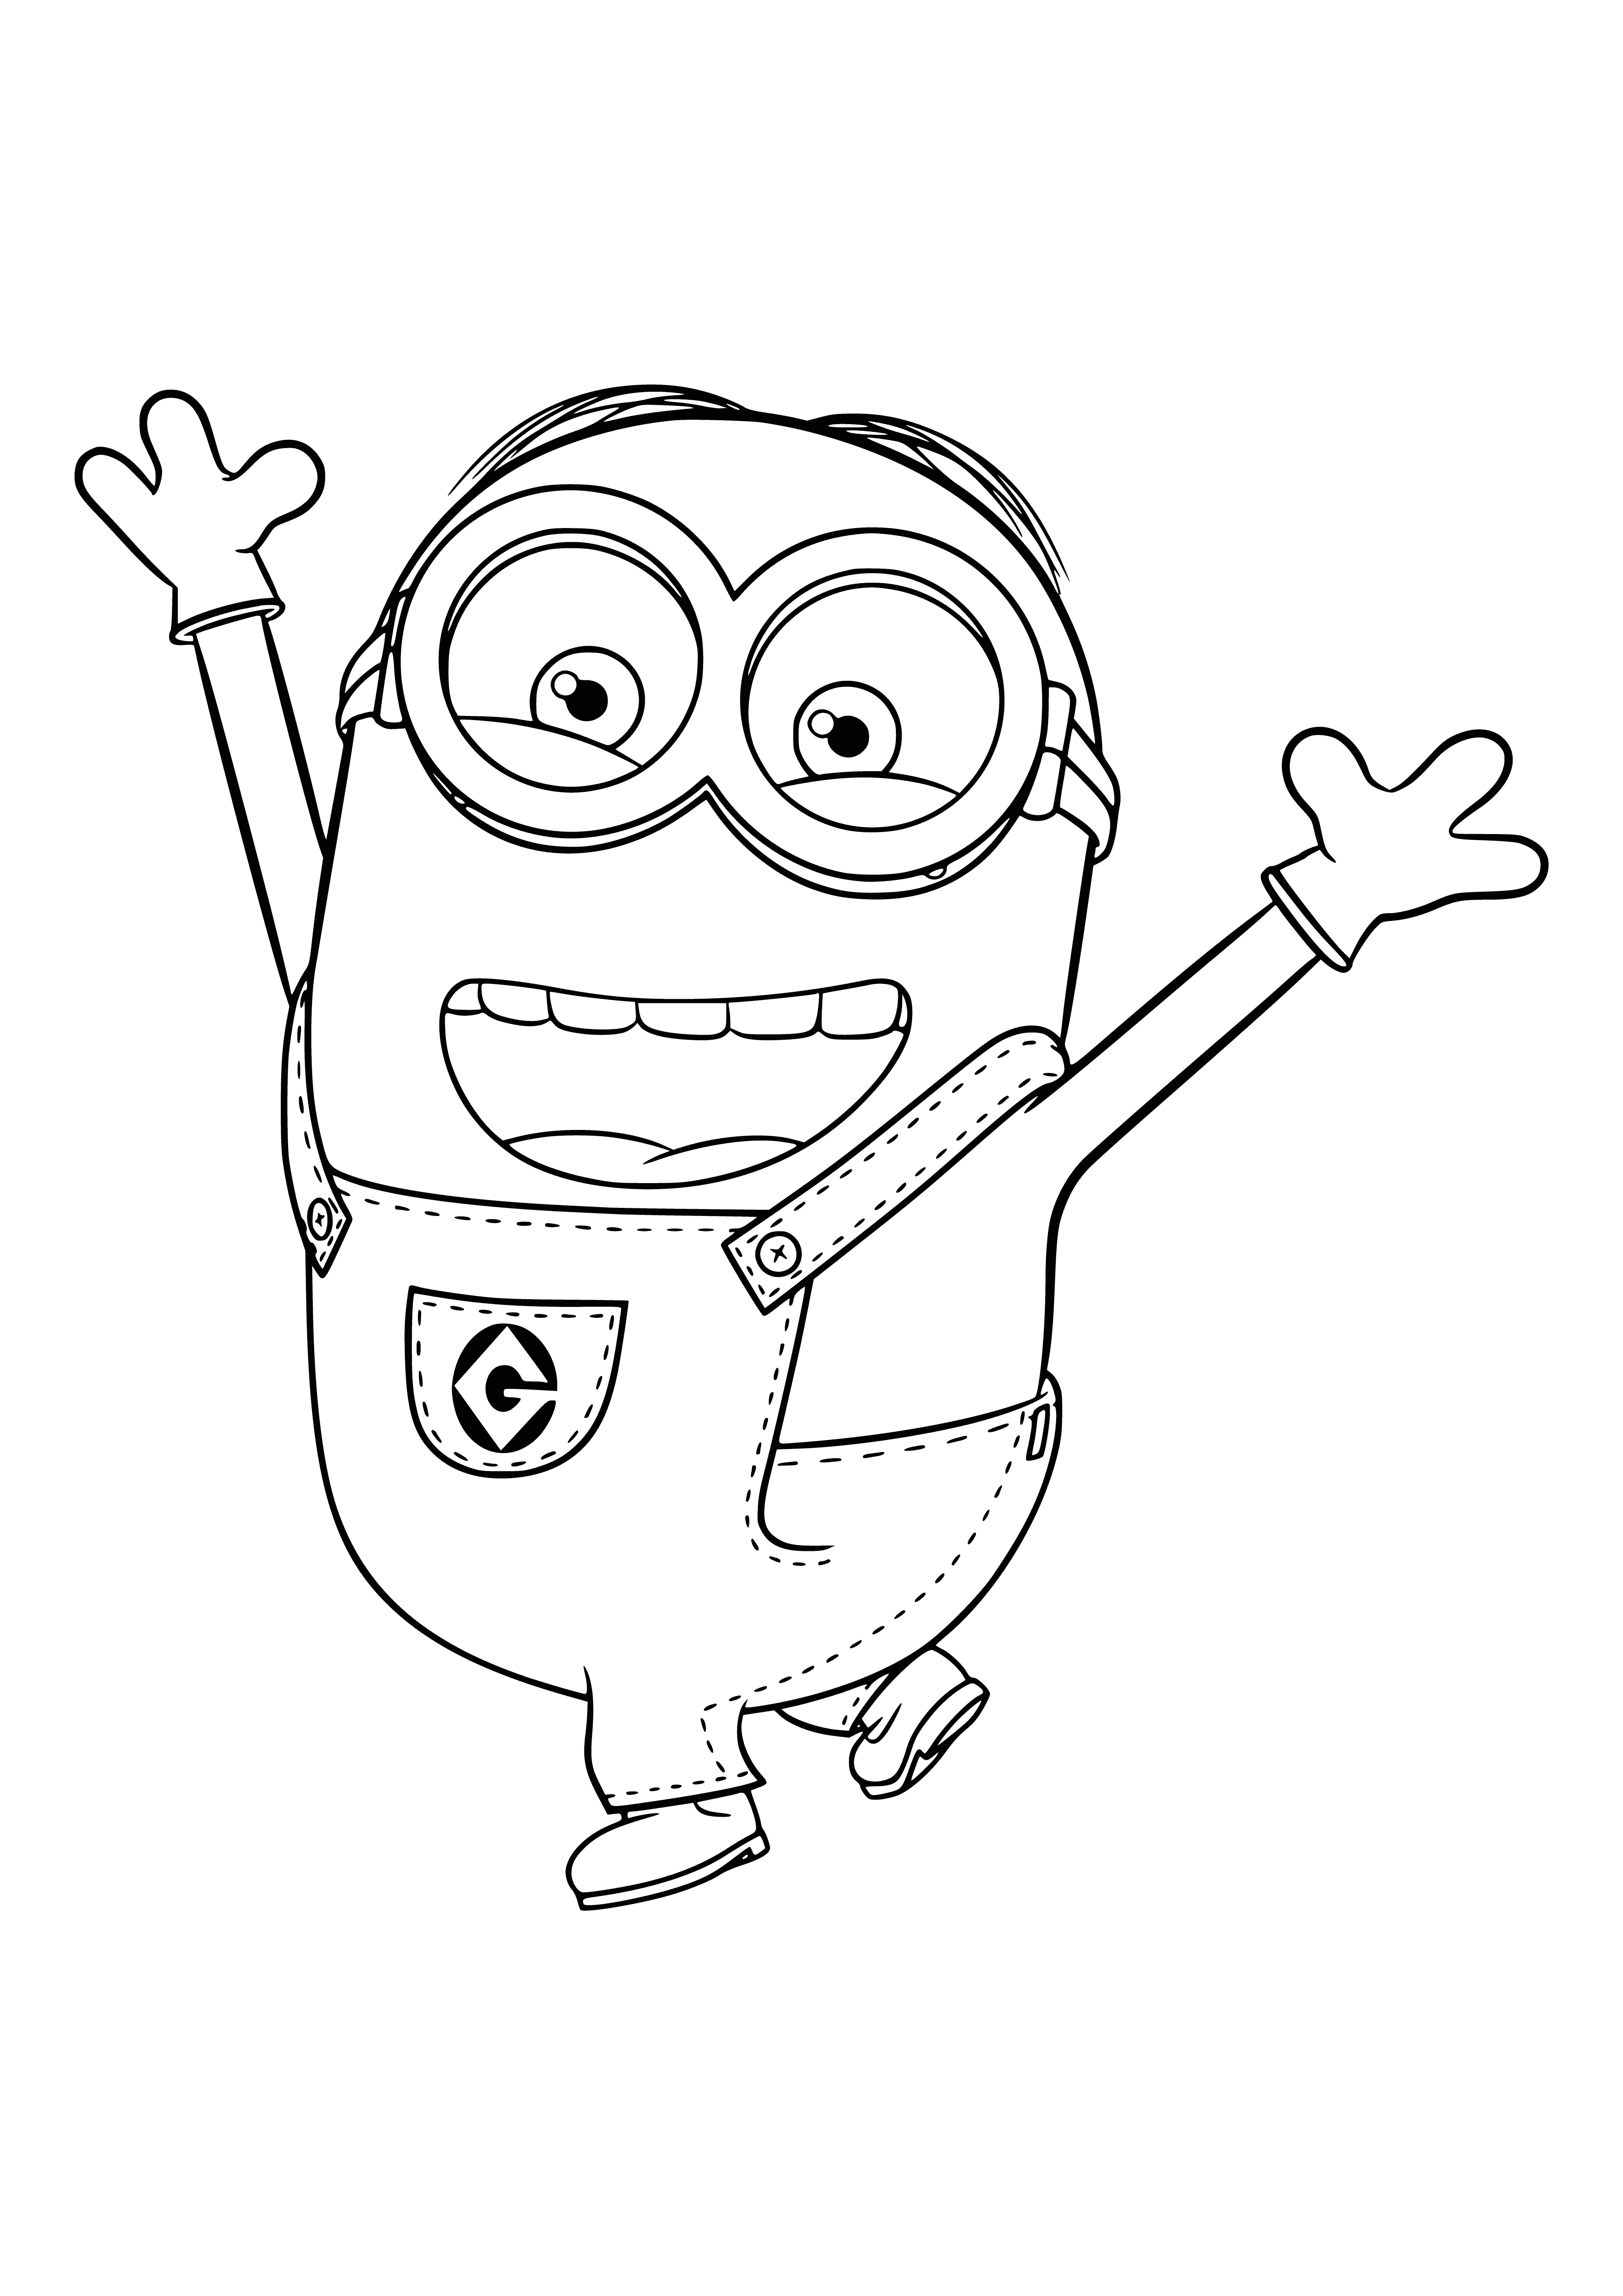 Cheerful minion coloring page